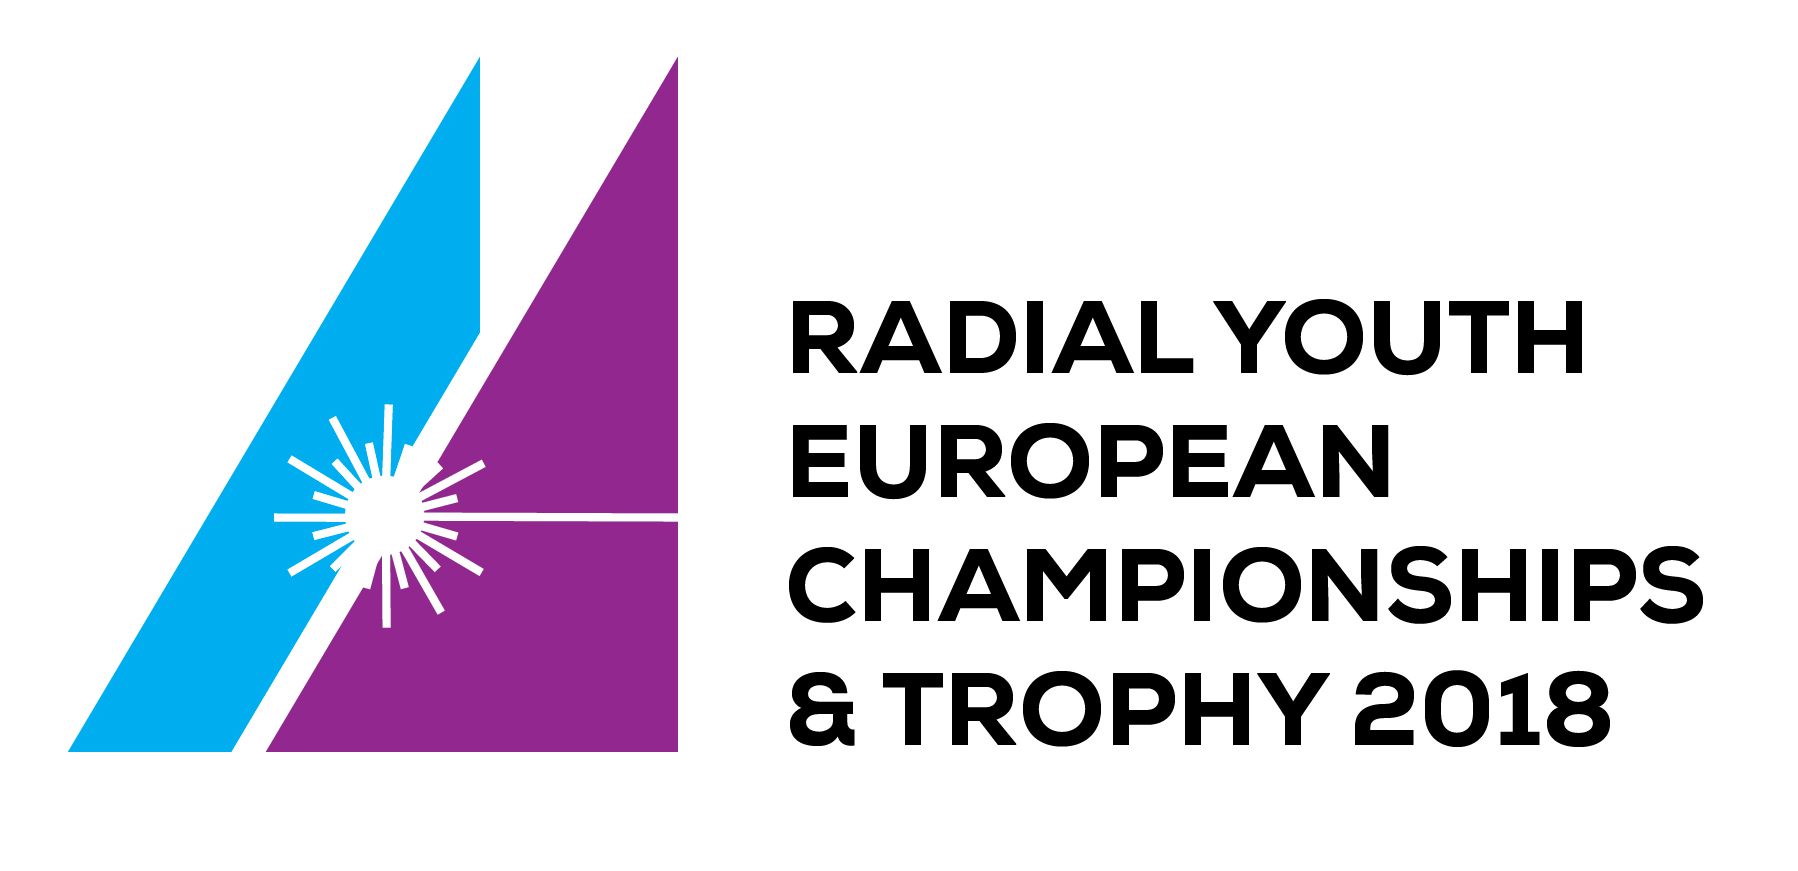 Radial Youth Europeans Championships & Trophy 2018